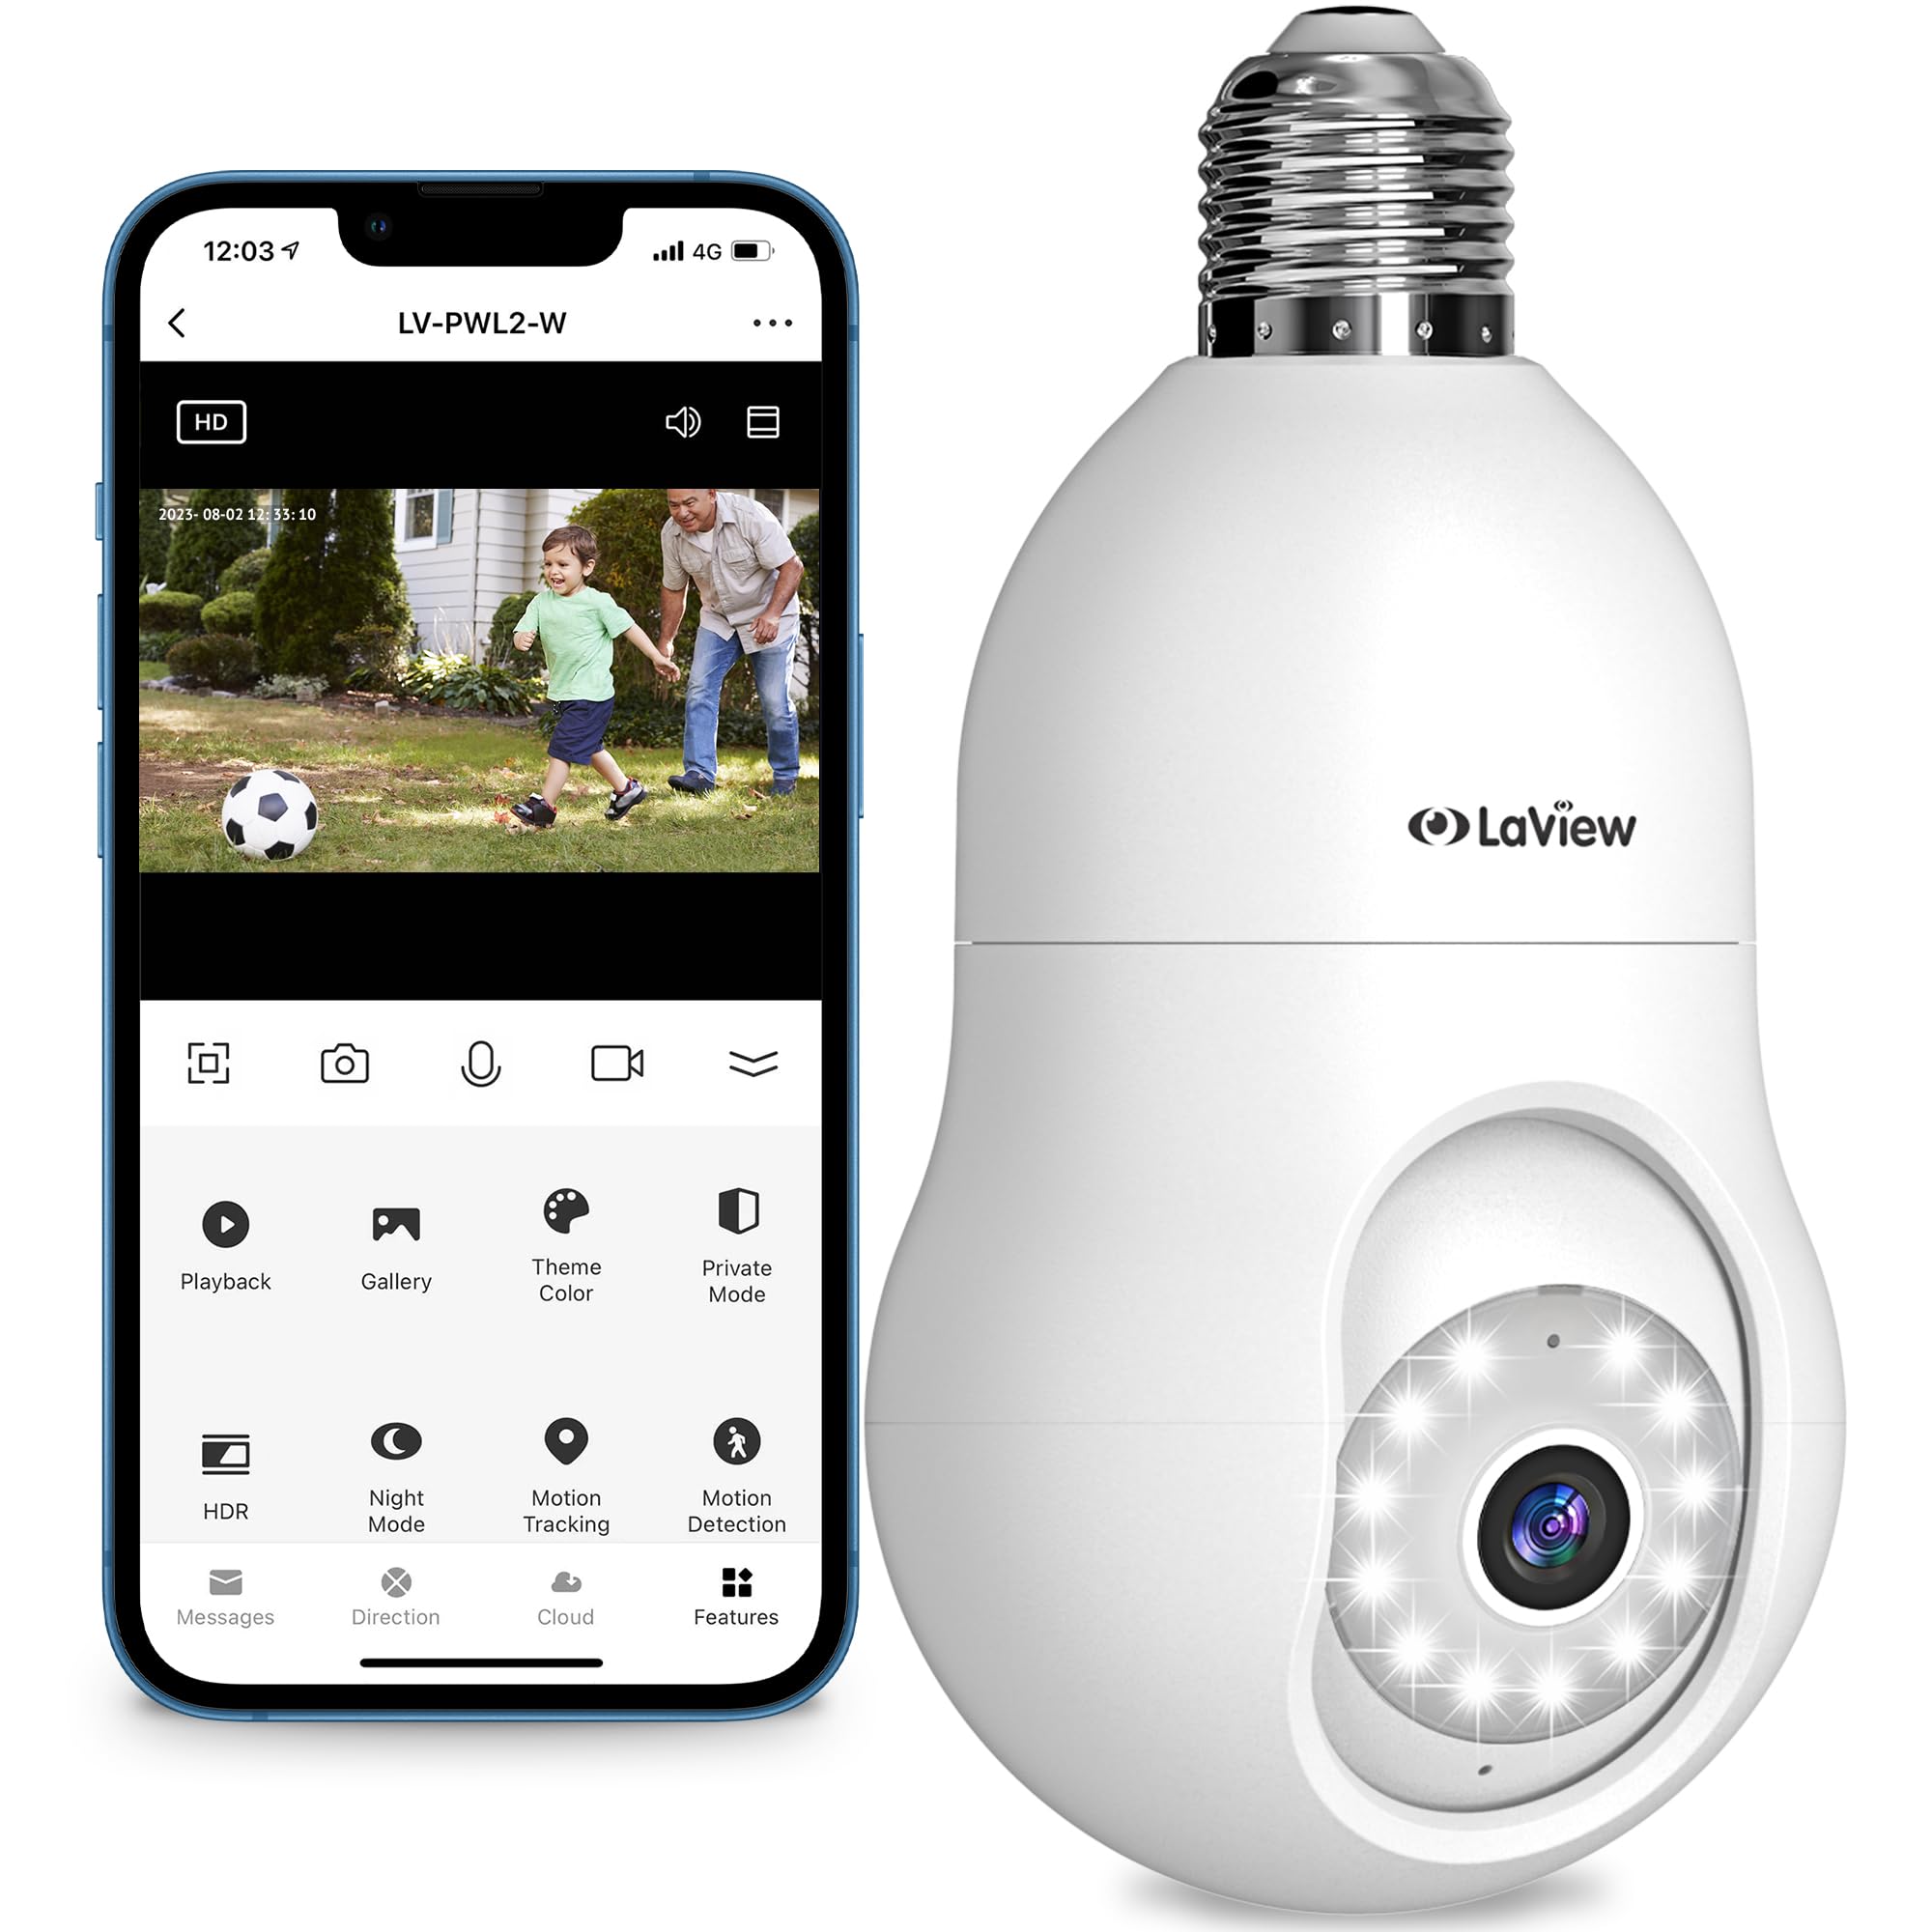 LaView 4MP Bulb Security Camera 2.4GHz 2K Security Cameras - $14